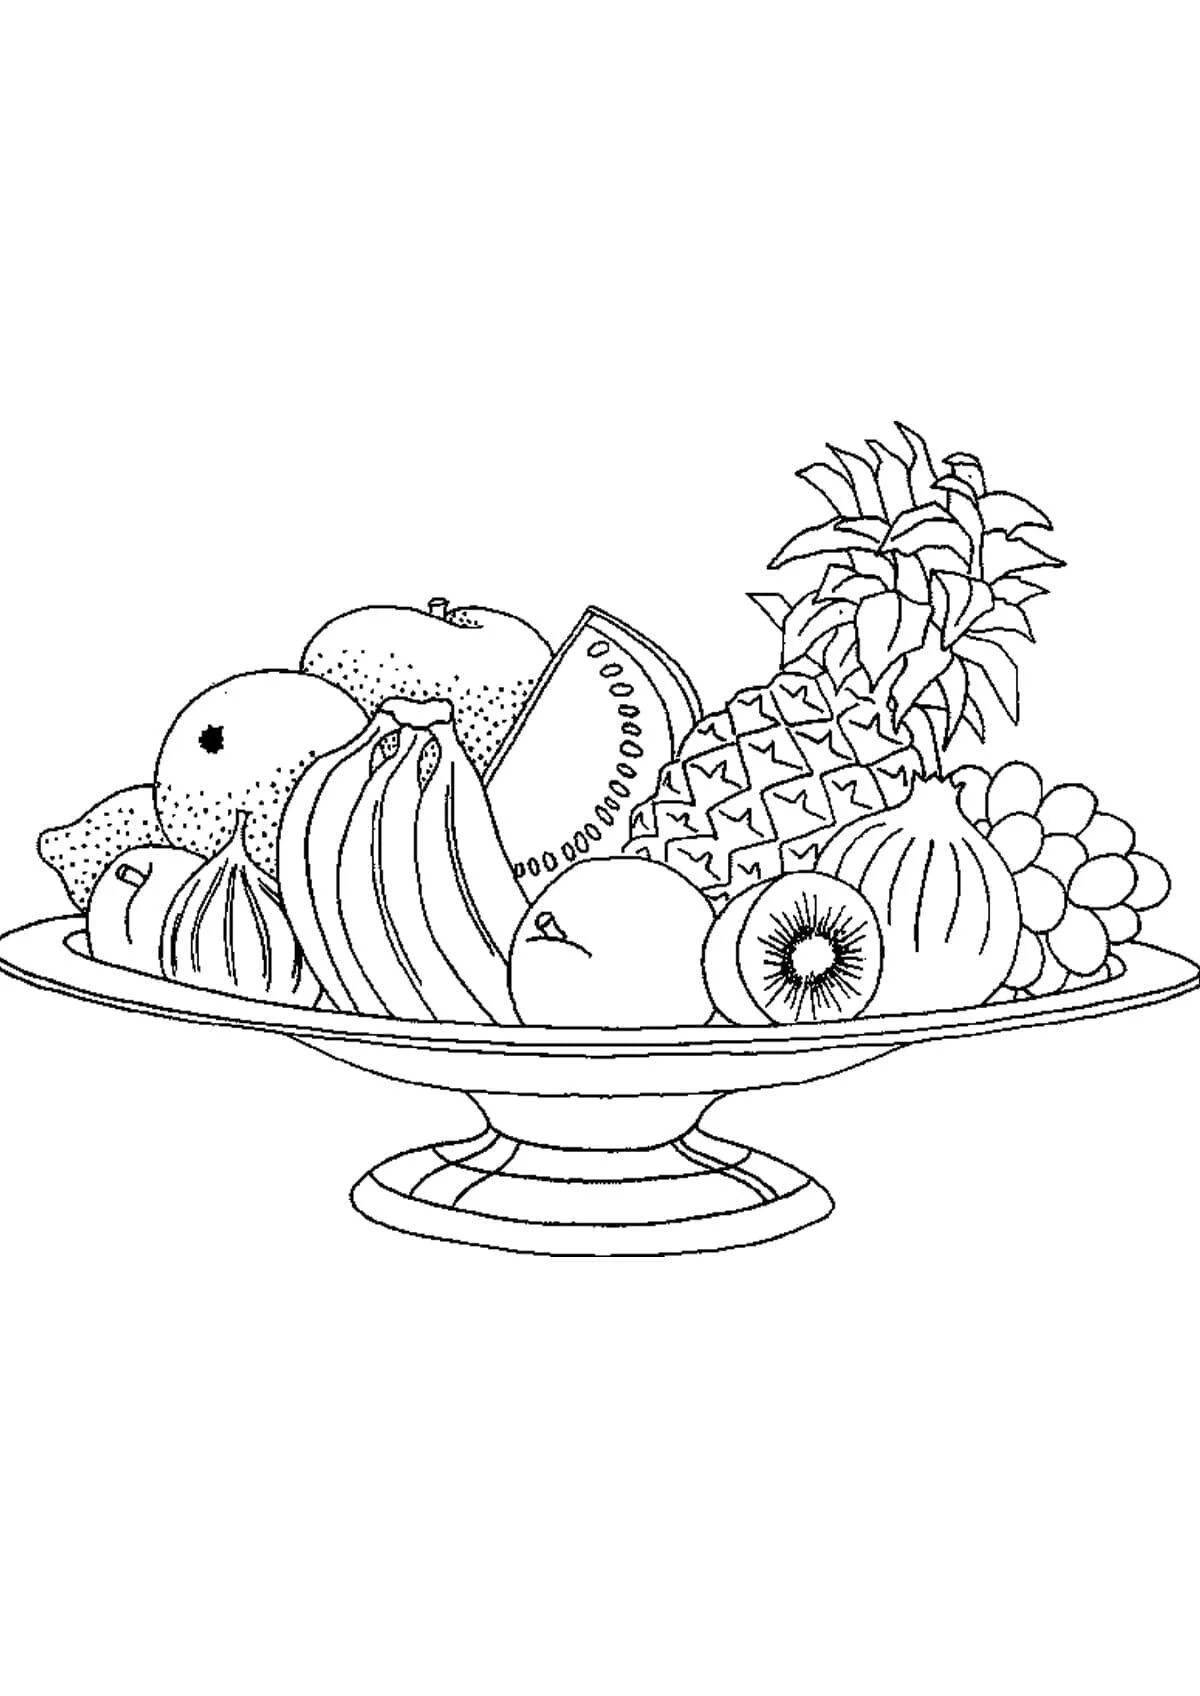 Attractive fruit plate coloring book